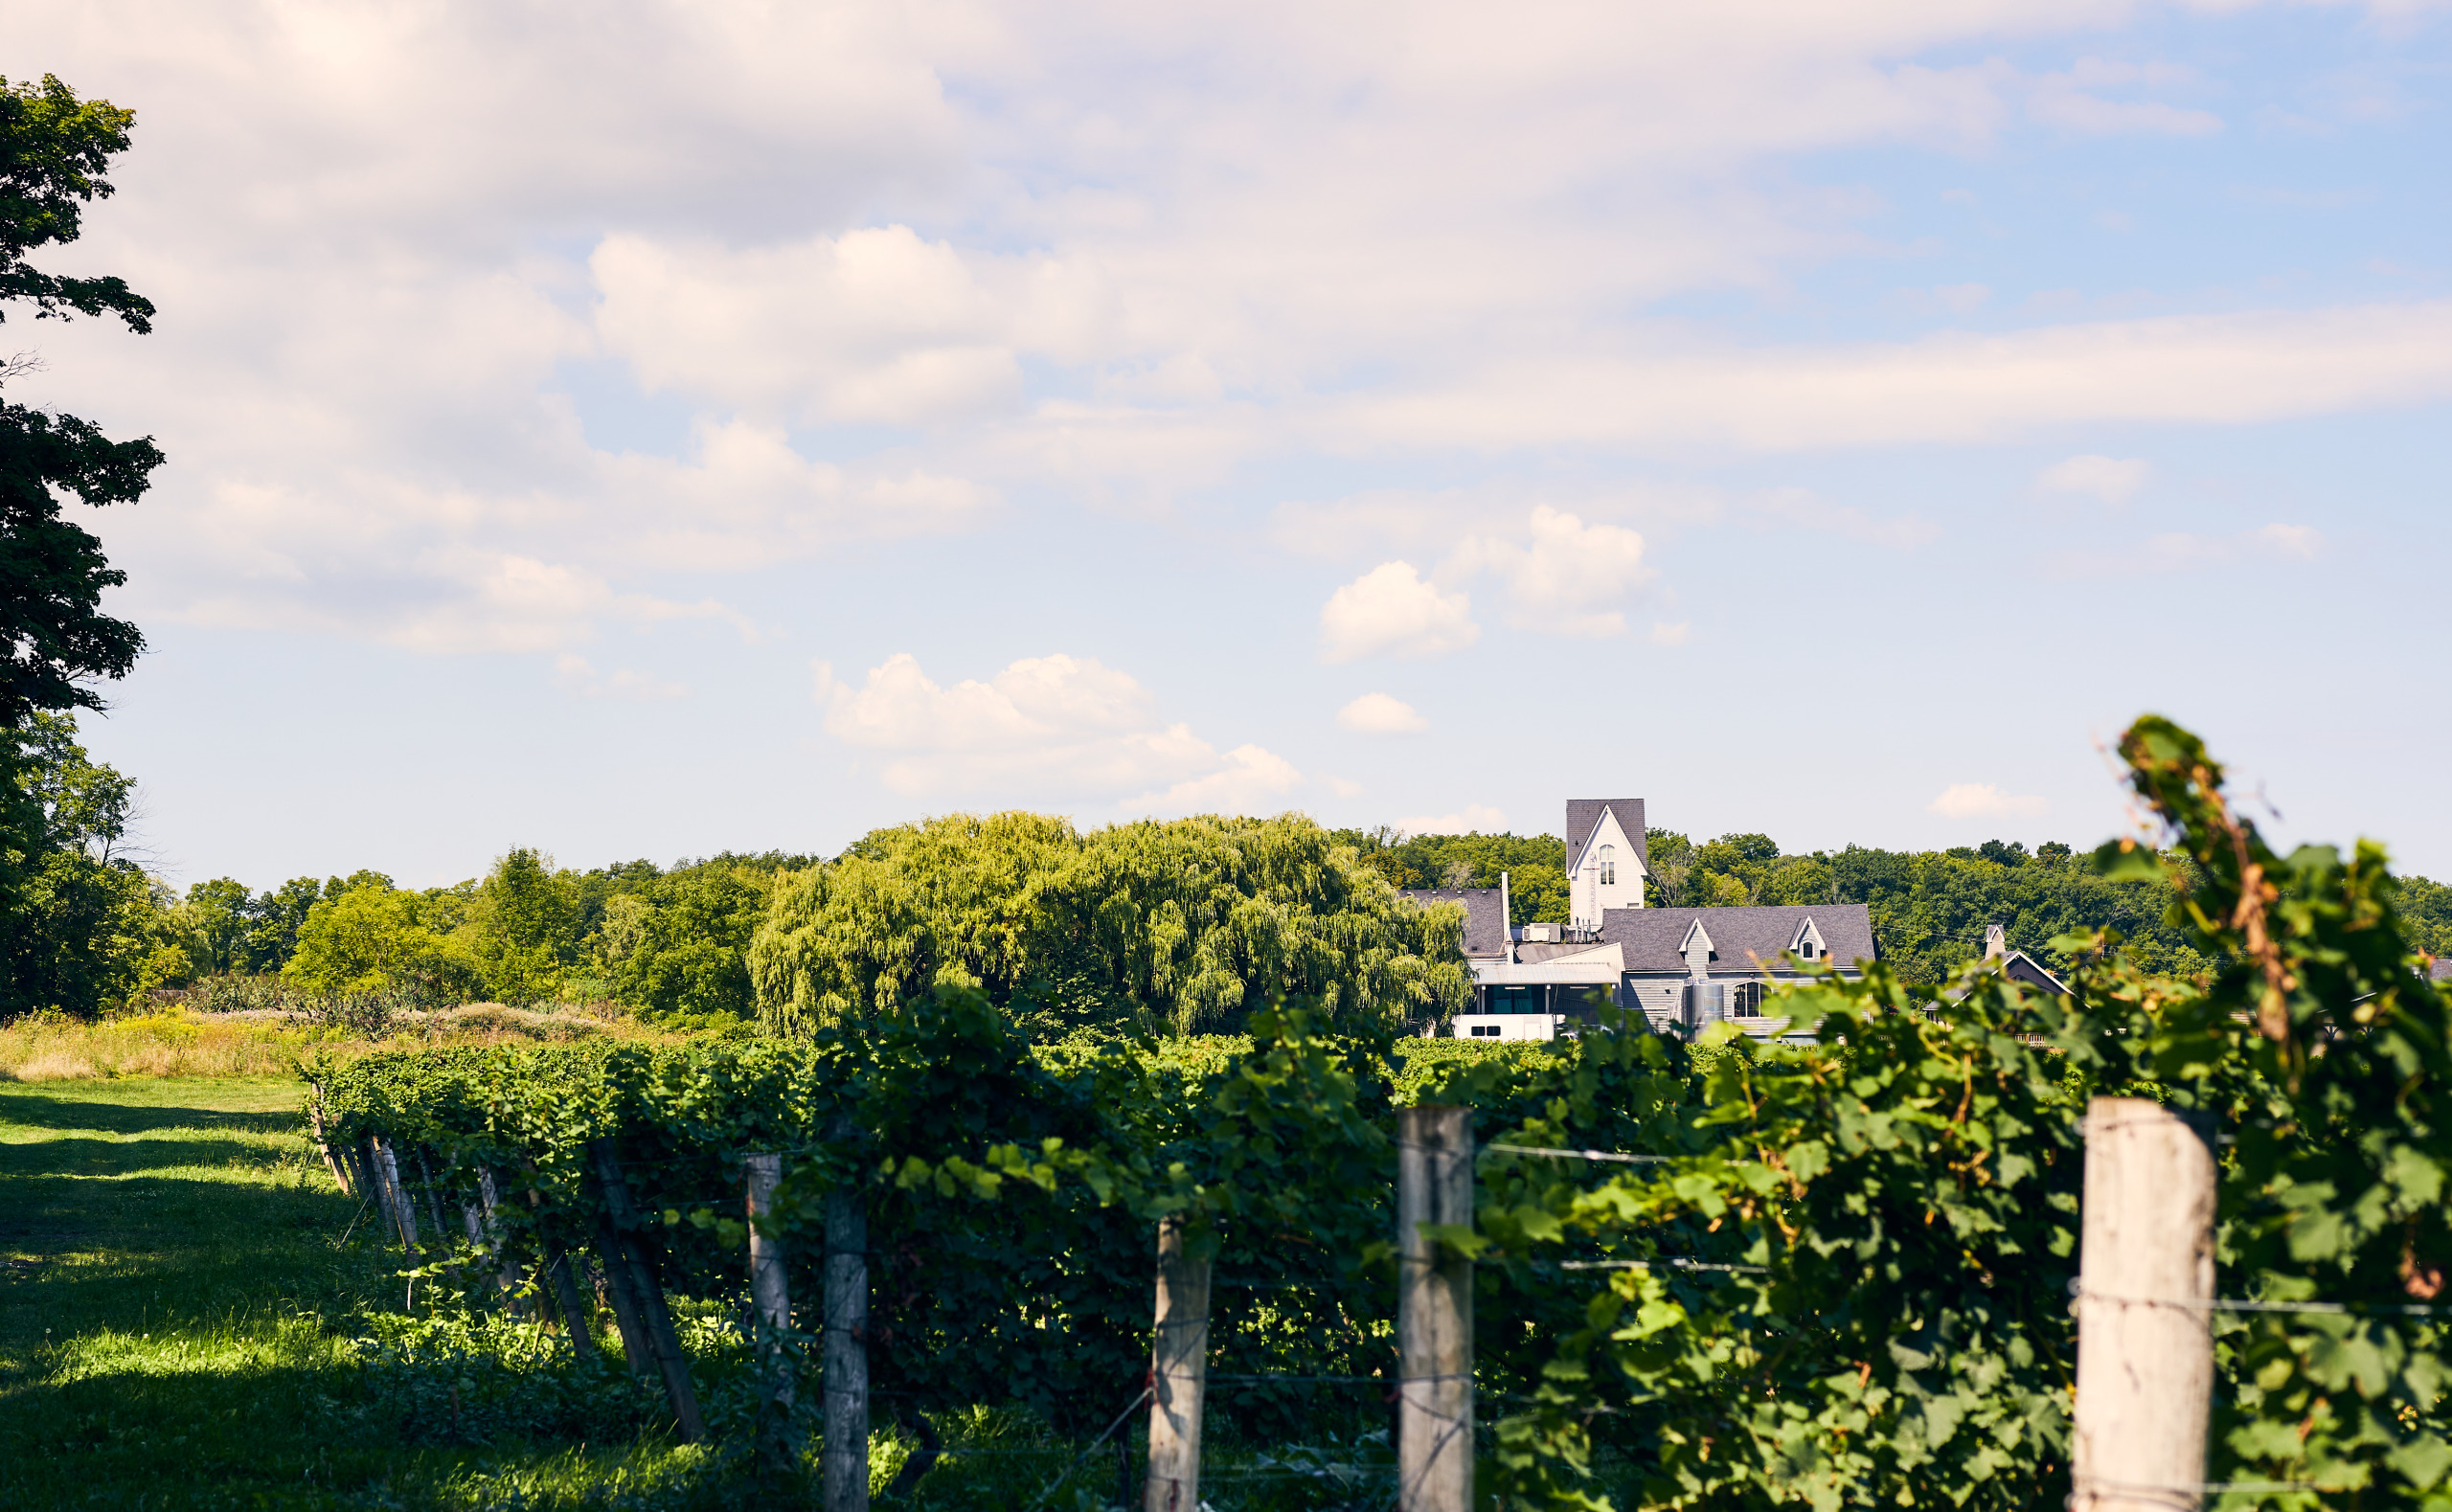 The vineyards of Vineland Estates Winery with the restaurant and tasting building in the distance